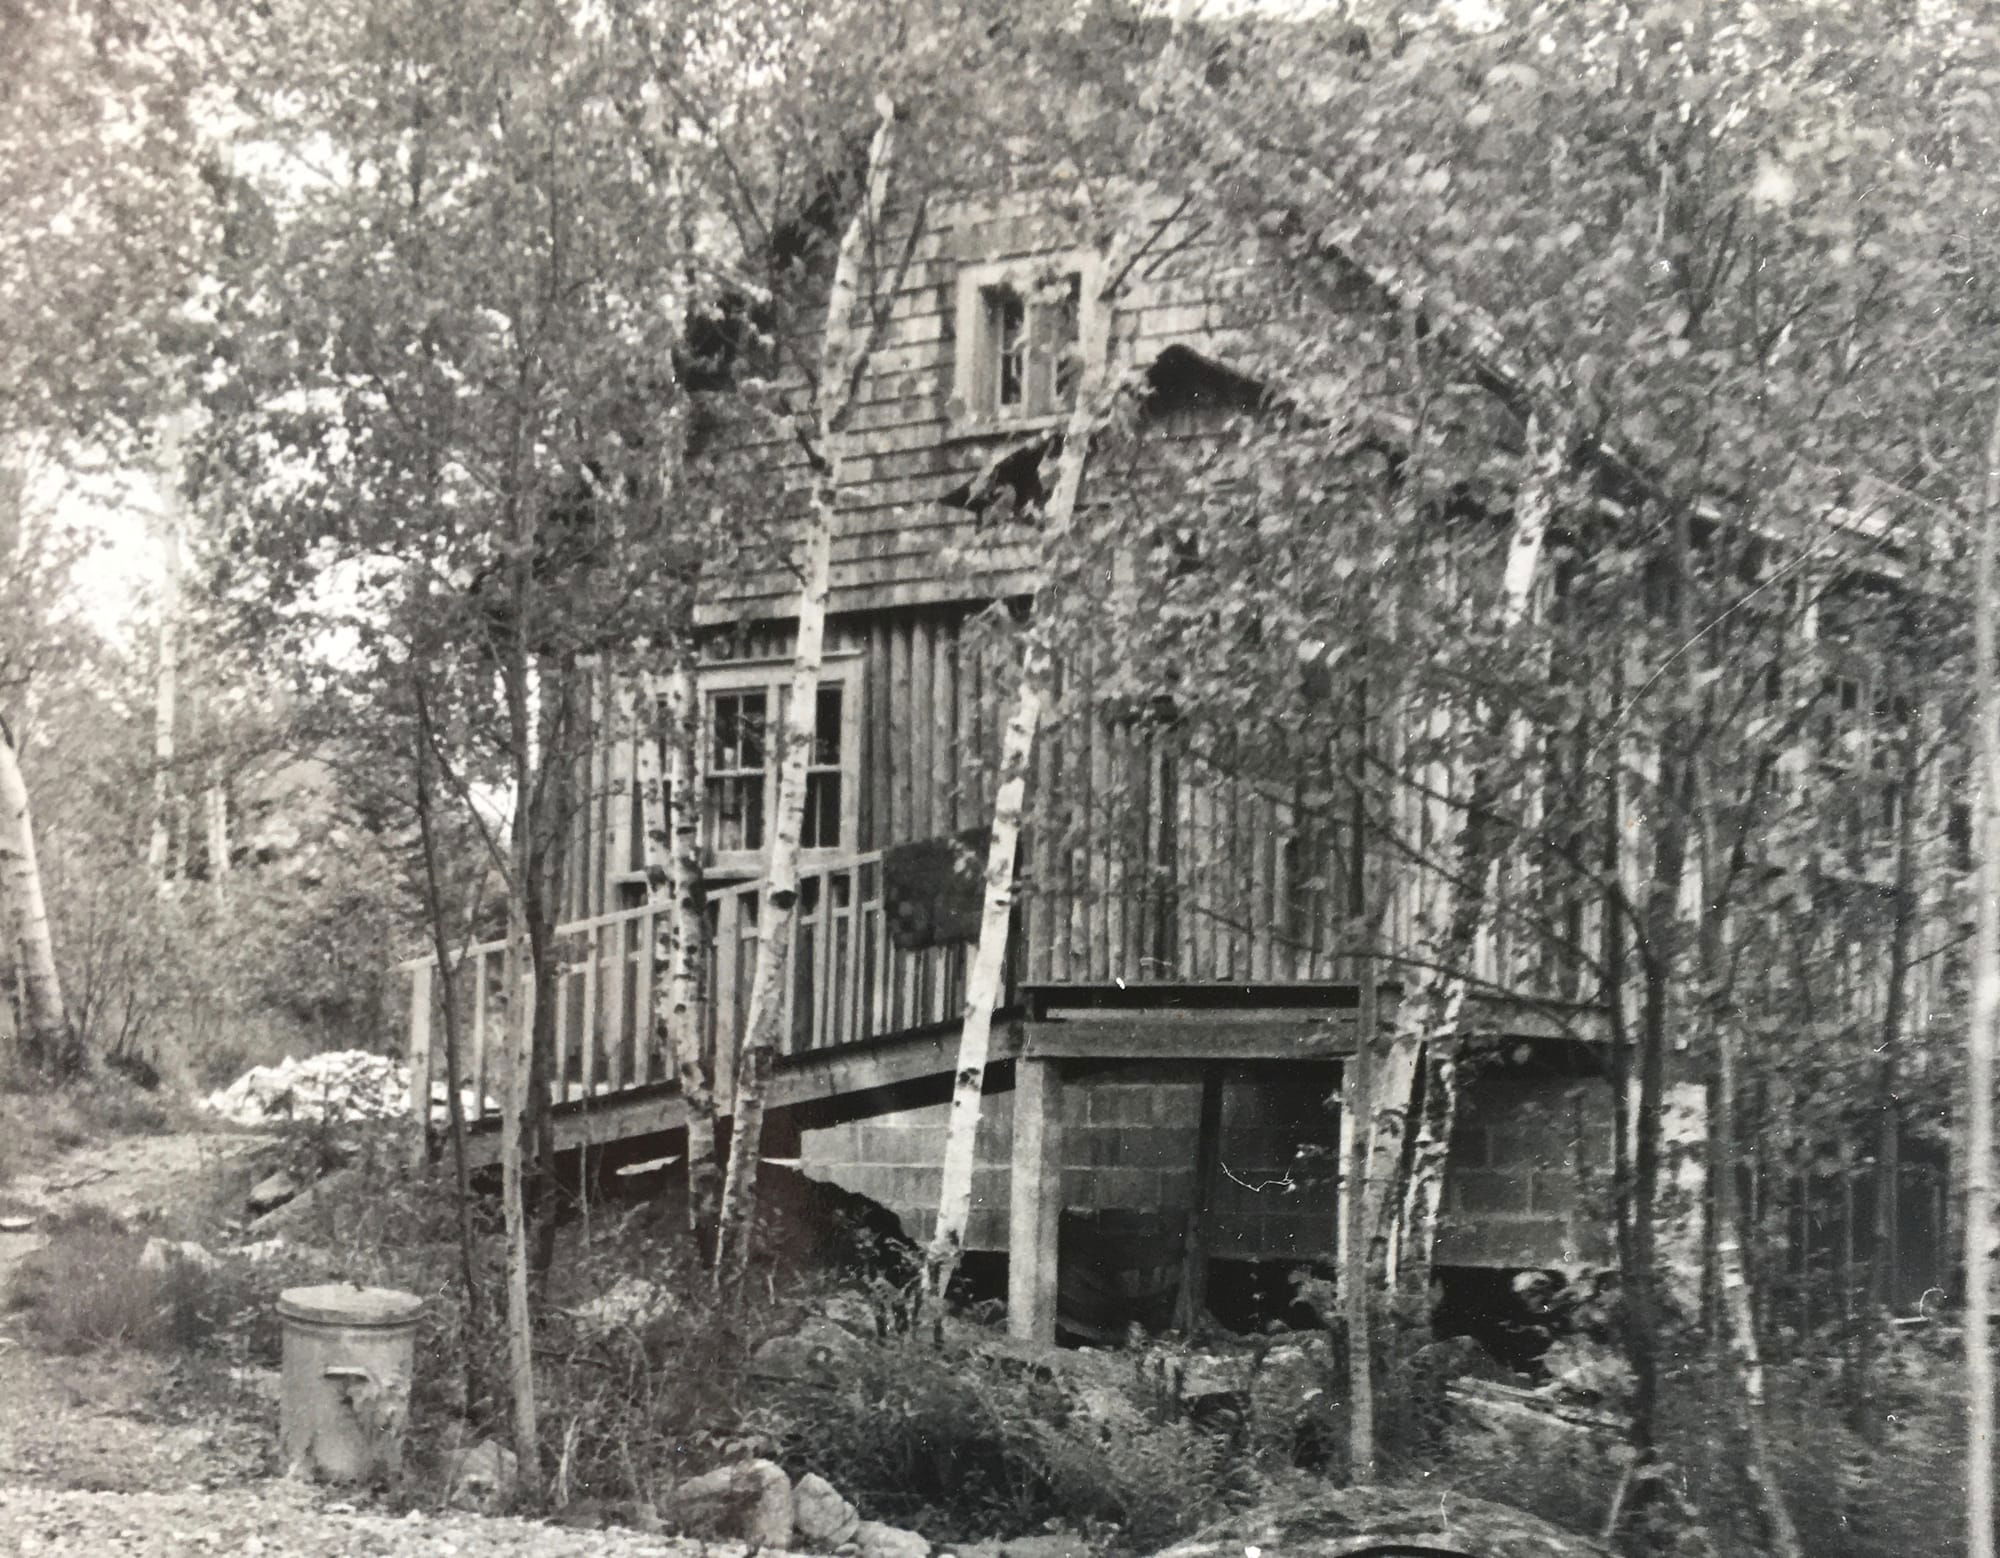 The Harris Home, early 1950s